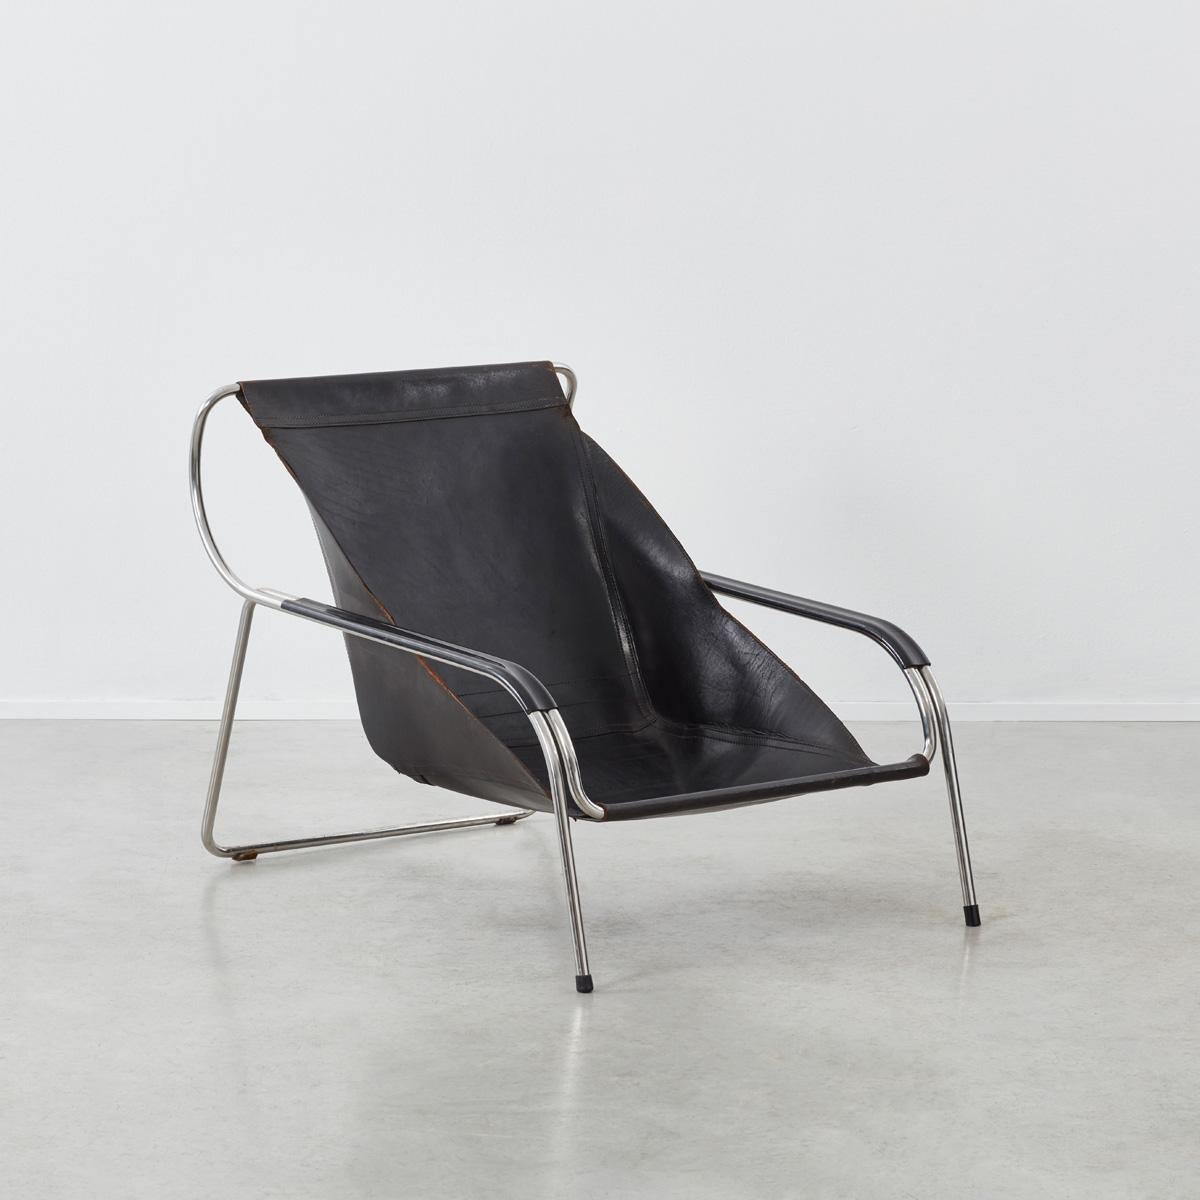 This is a first edition of Zanuso’s Maggiolina lounge chair. The structure is formed of curved steel tubing from which a burlap leather ‘bag’ is hung. The Maggiolina chair was originally designed for a competition held by the MoMa in New York and it